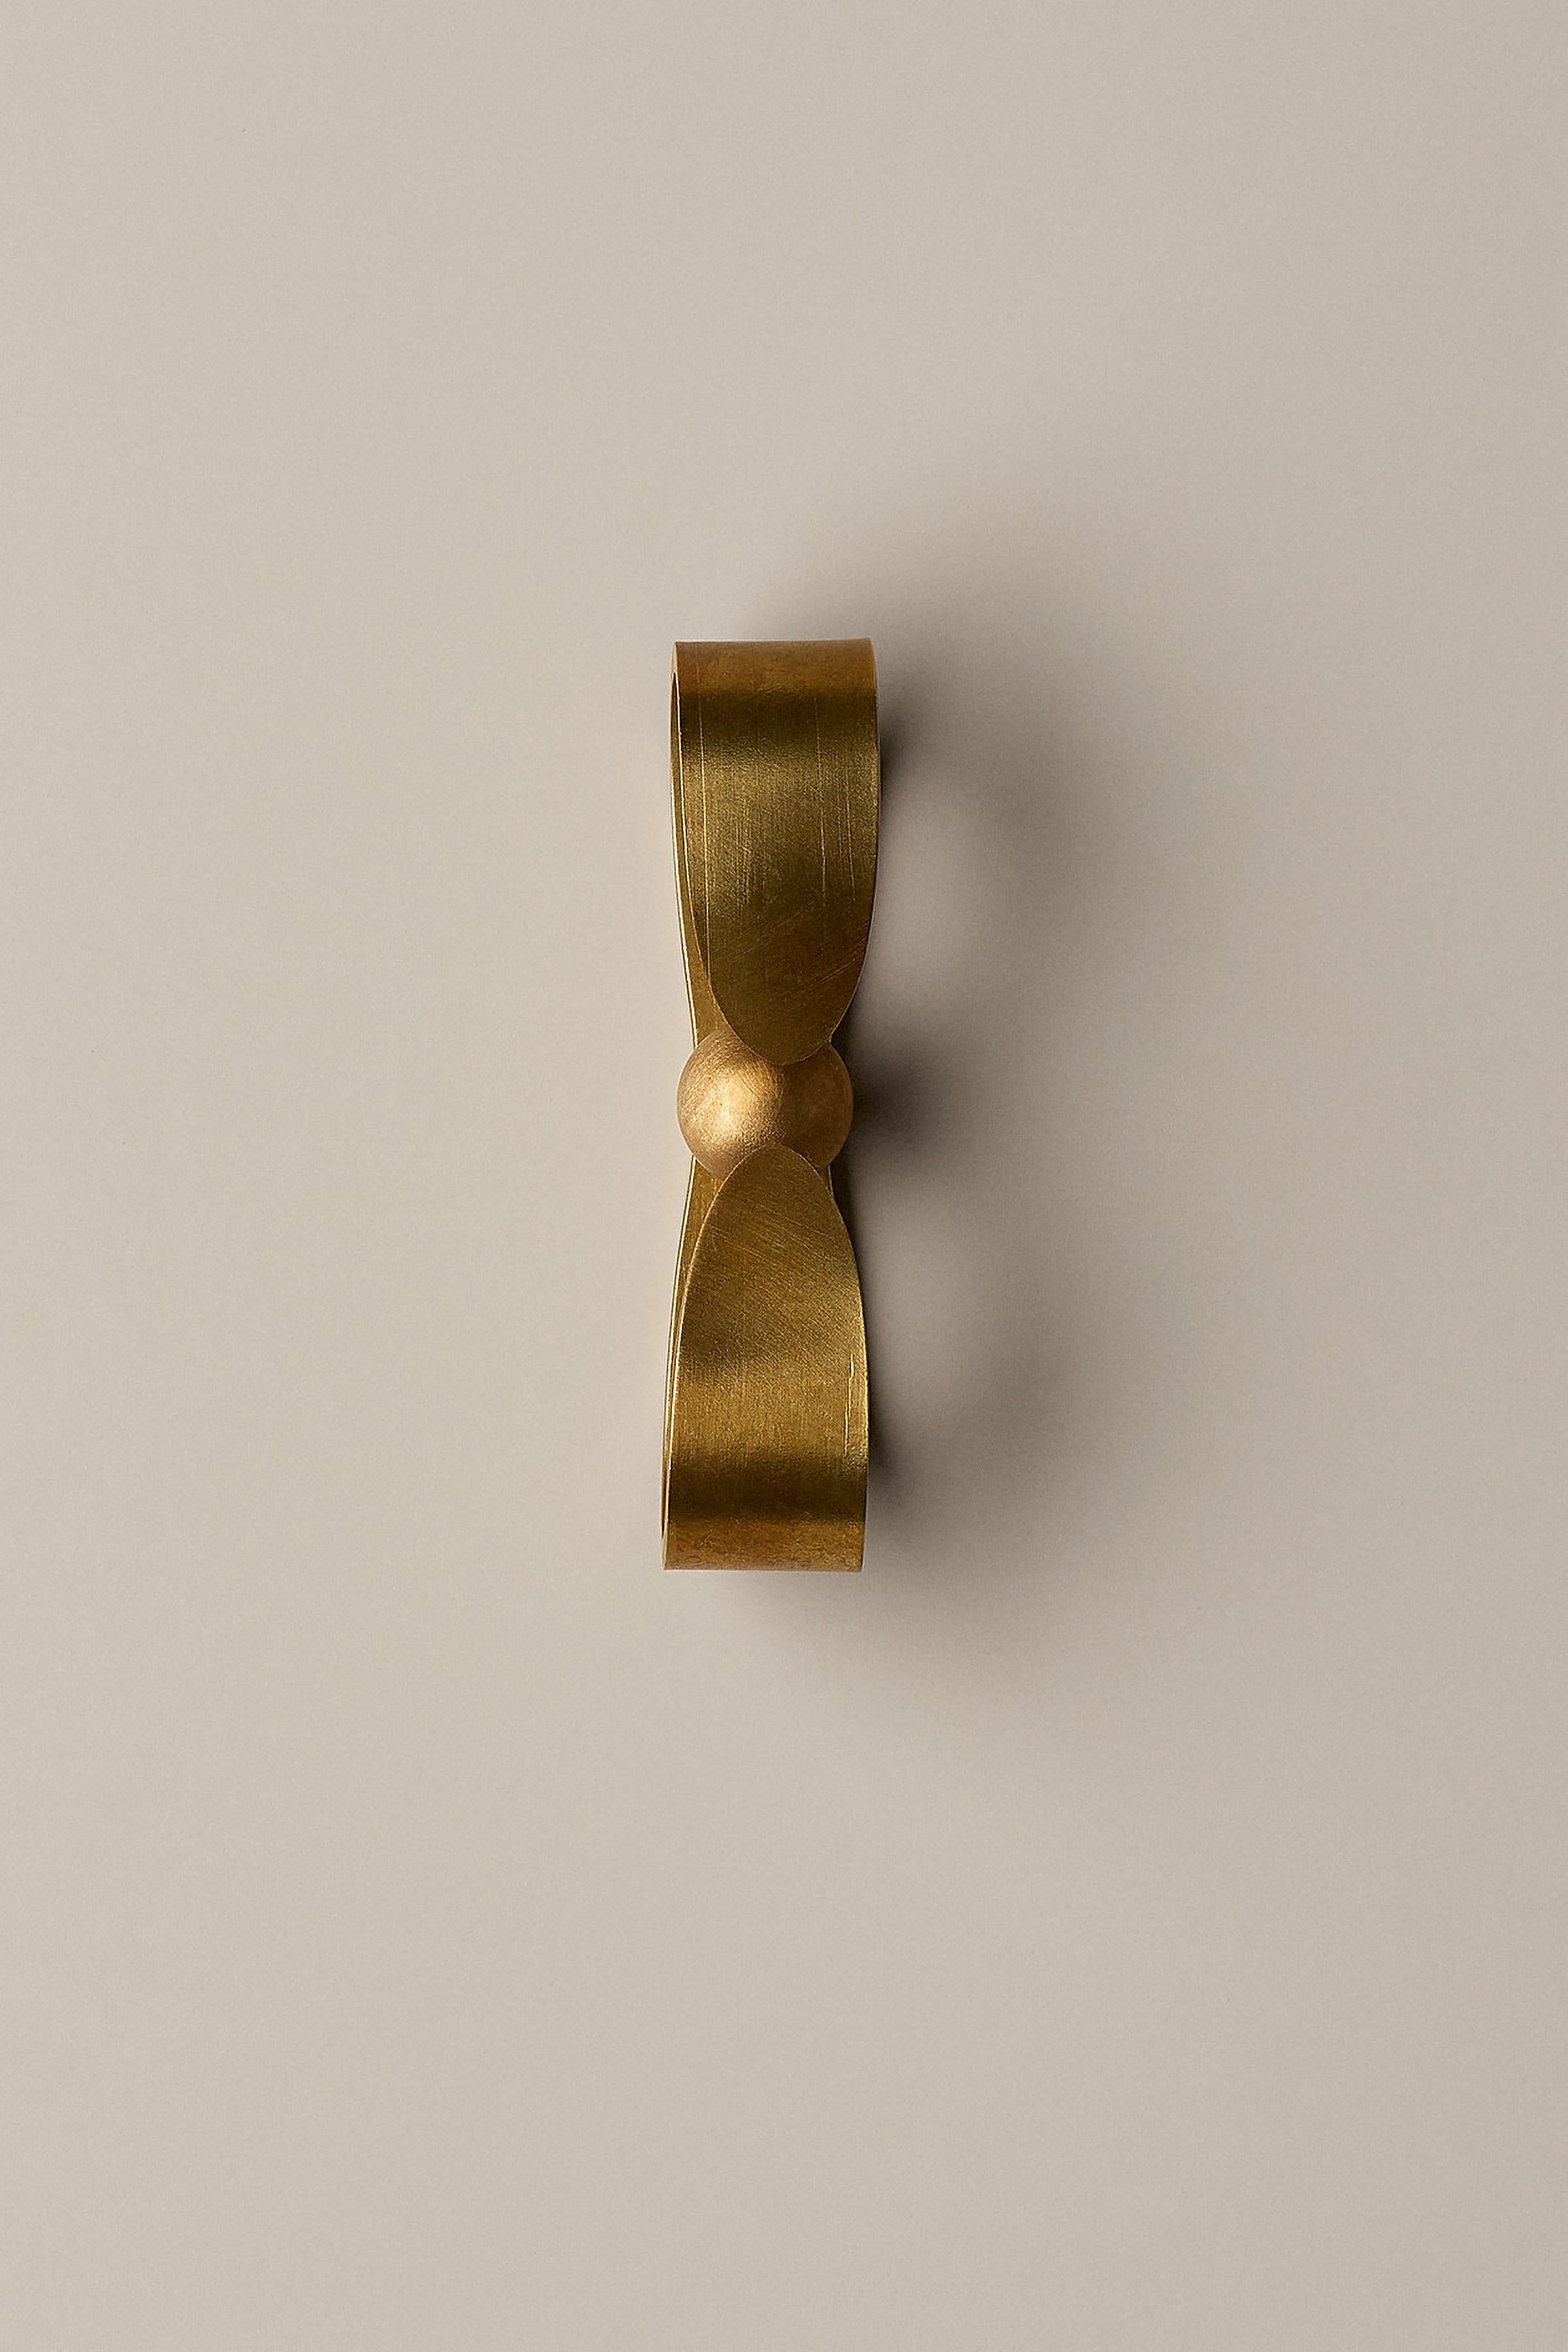 Swedish Contemporary Door Handle / Knob 'Prim' by Spaces Within, Amber Brass For Sale